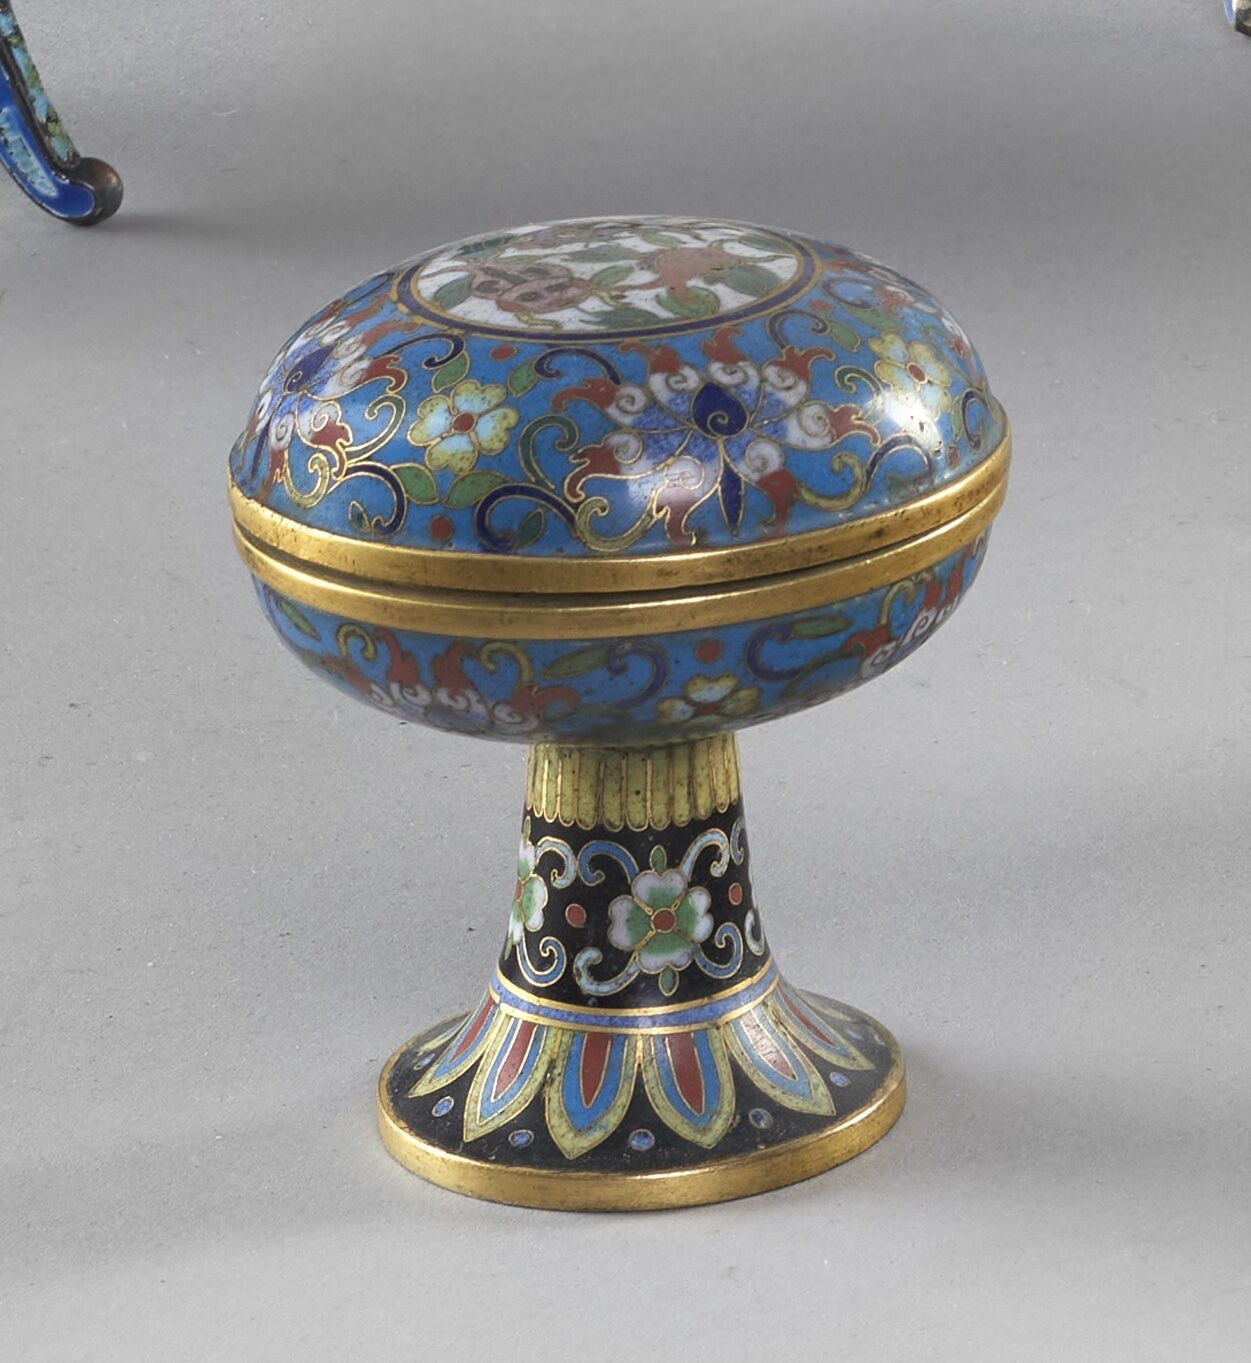 Null CHINA - 19th century
Small lenticular box on high pedestal in cloisonné ena&hellip;